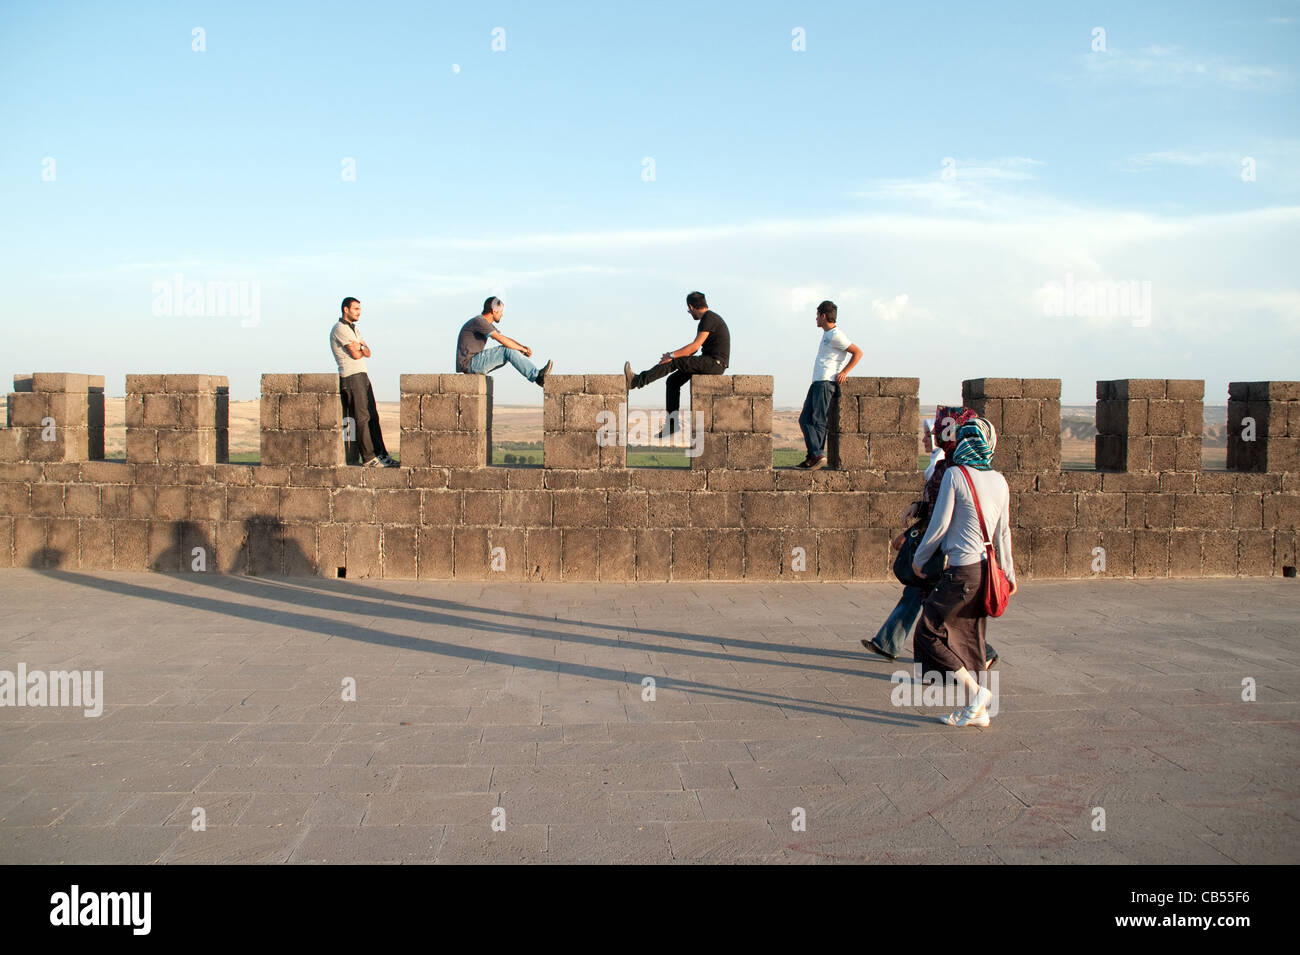 A group of four young Kurdish men, and two women, atop the old walls and fortress of the city of Diyarbakir, in eastern Anatolia, southeastern Turkey. Stock Photo